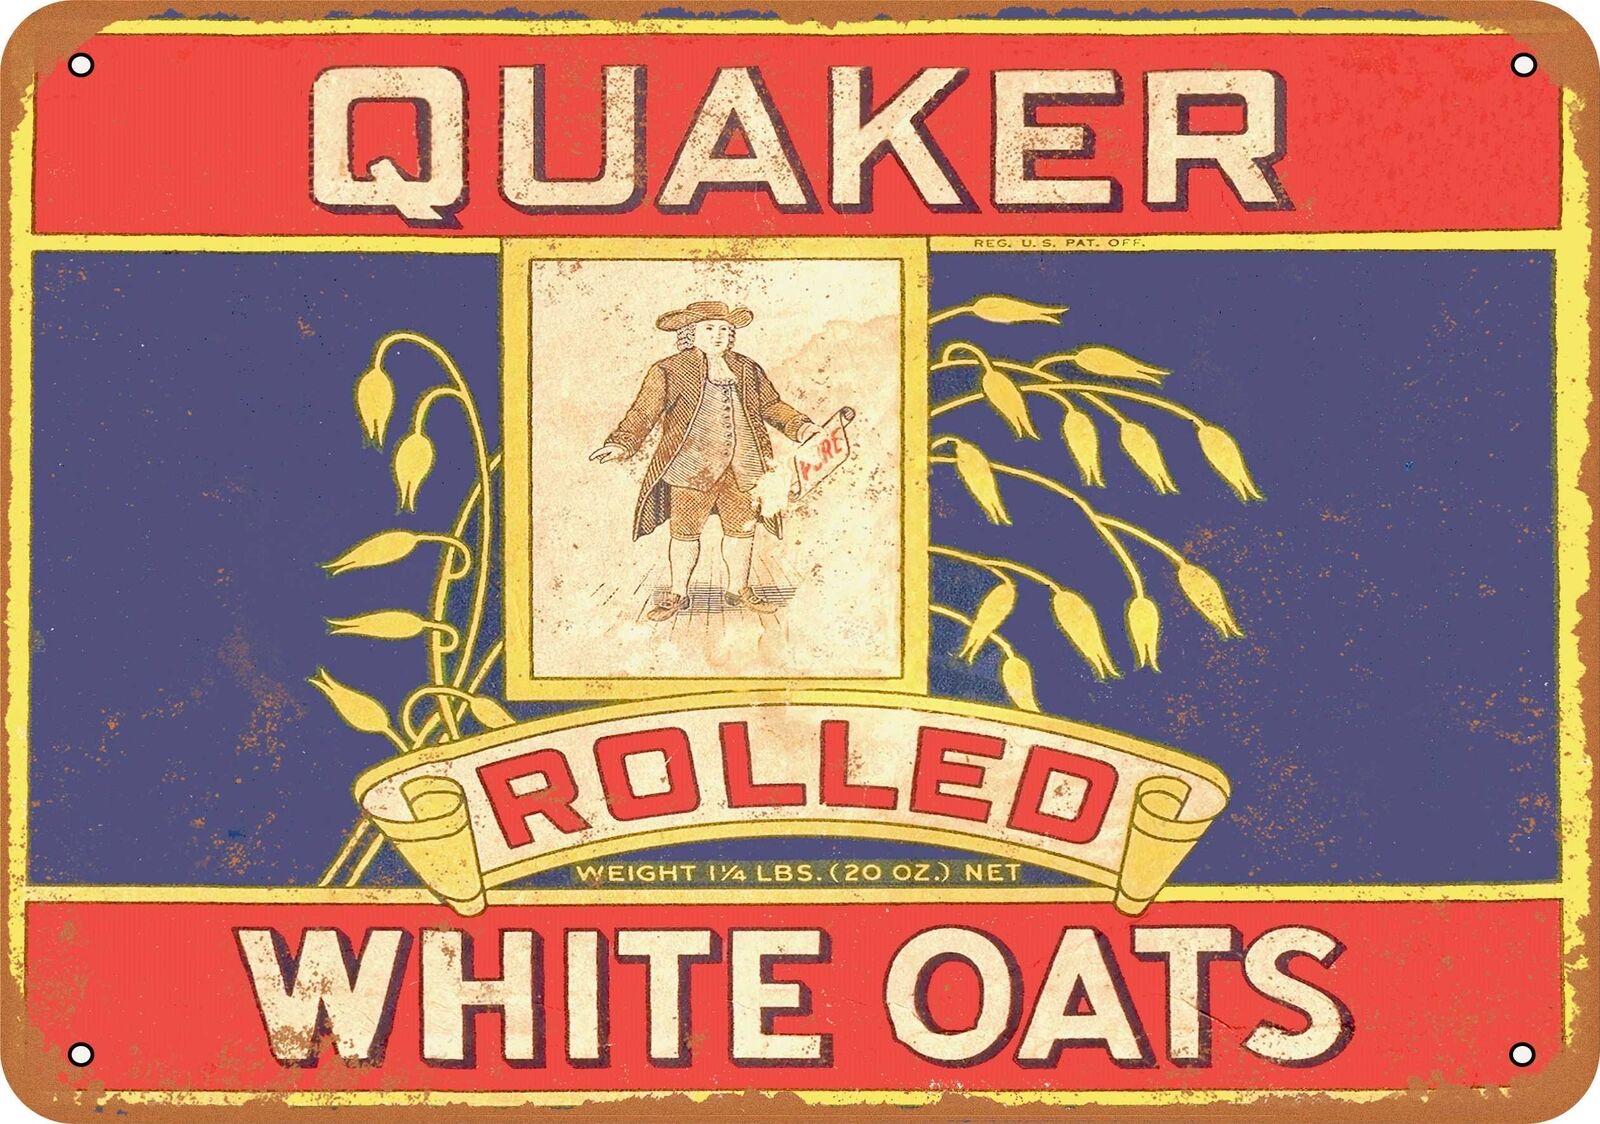 Metal Sign - 1911 Quaker Rolled White Oats - Vintage Look Reproduction